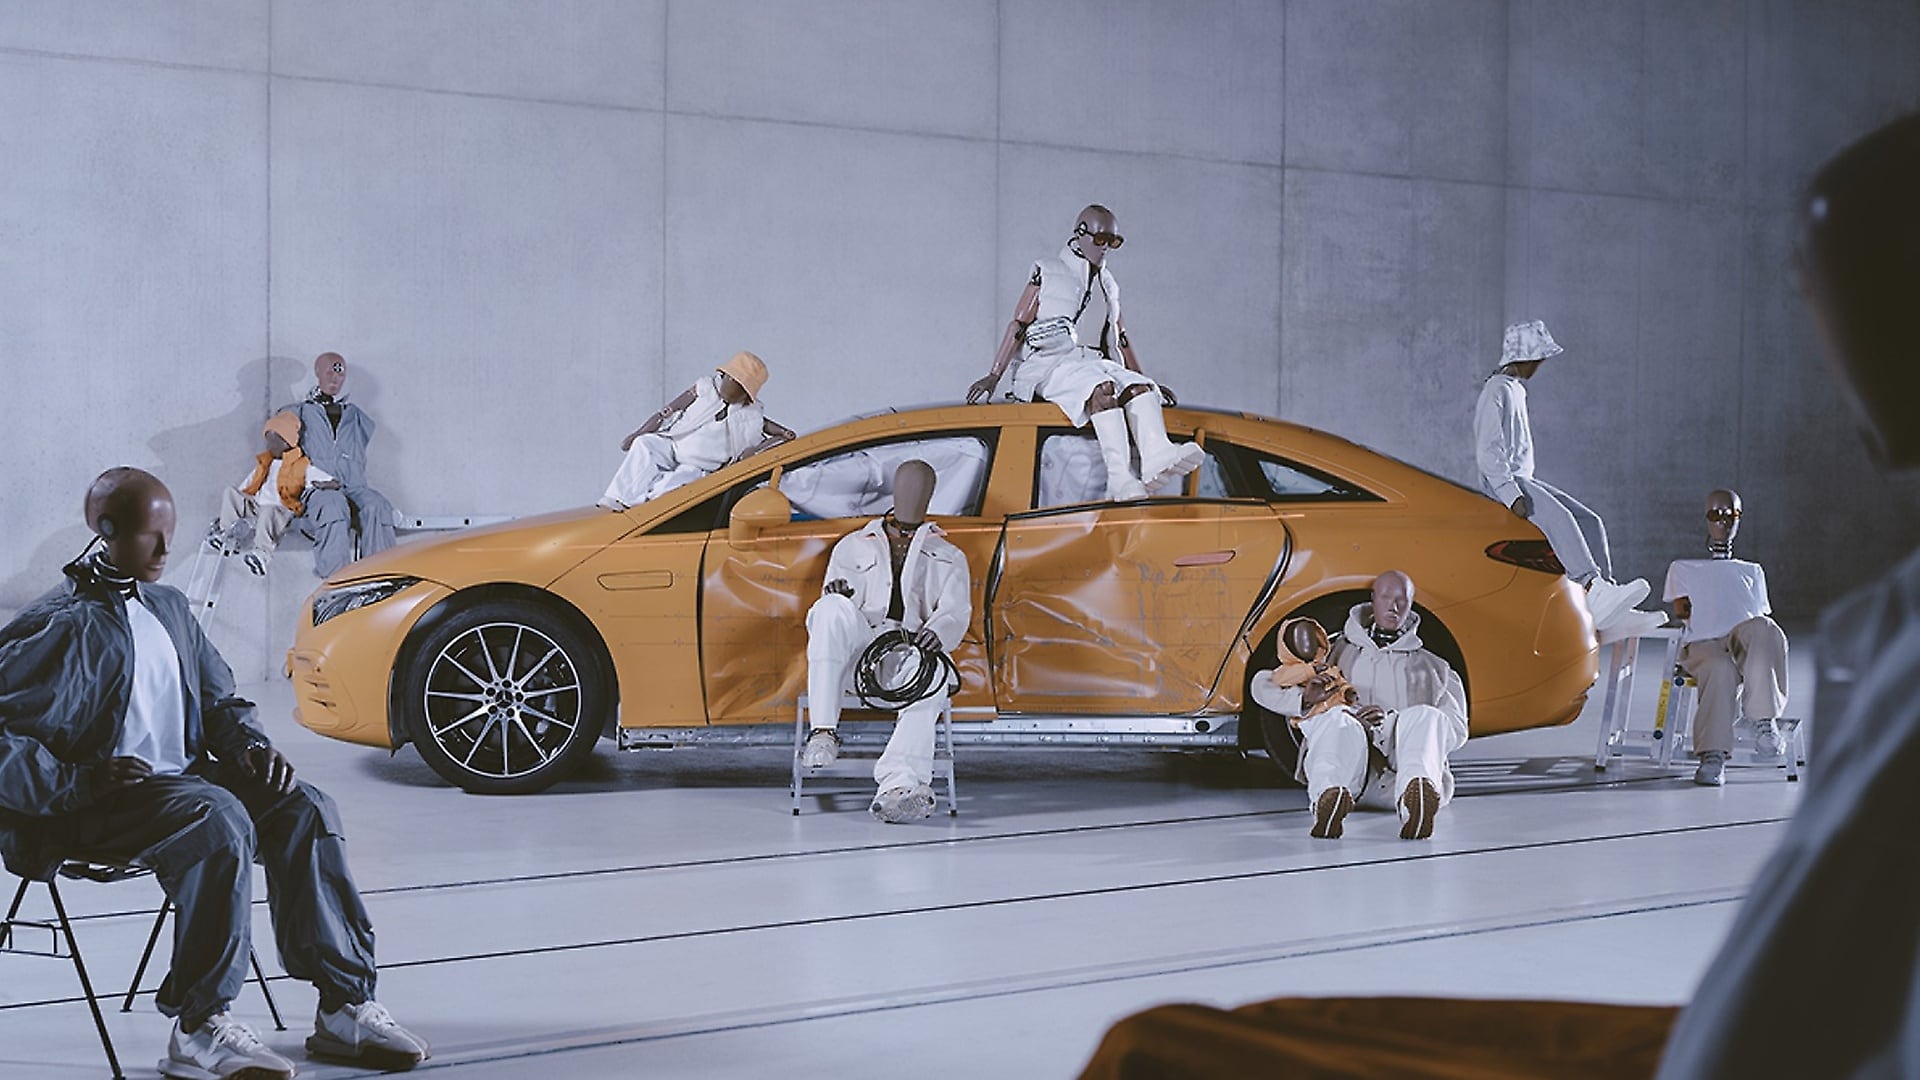 The Mercedes-Benz crashtests involve 120 dummies in 21 different versions.